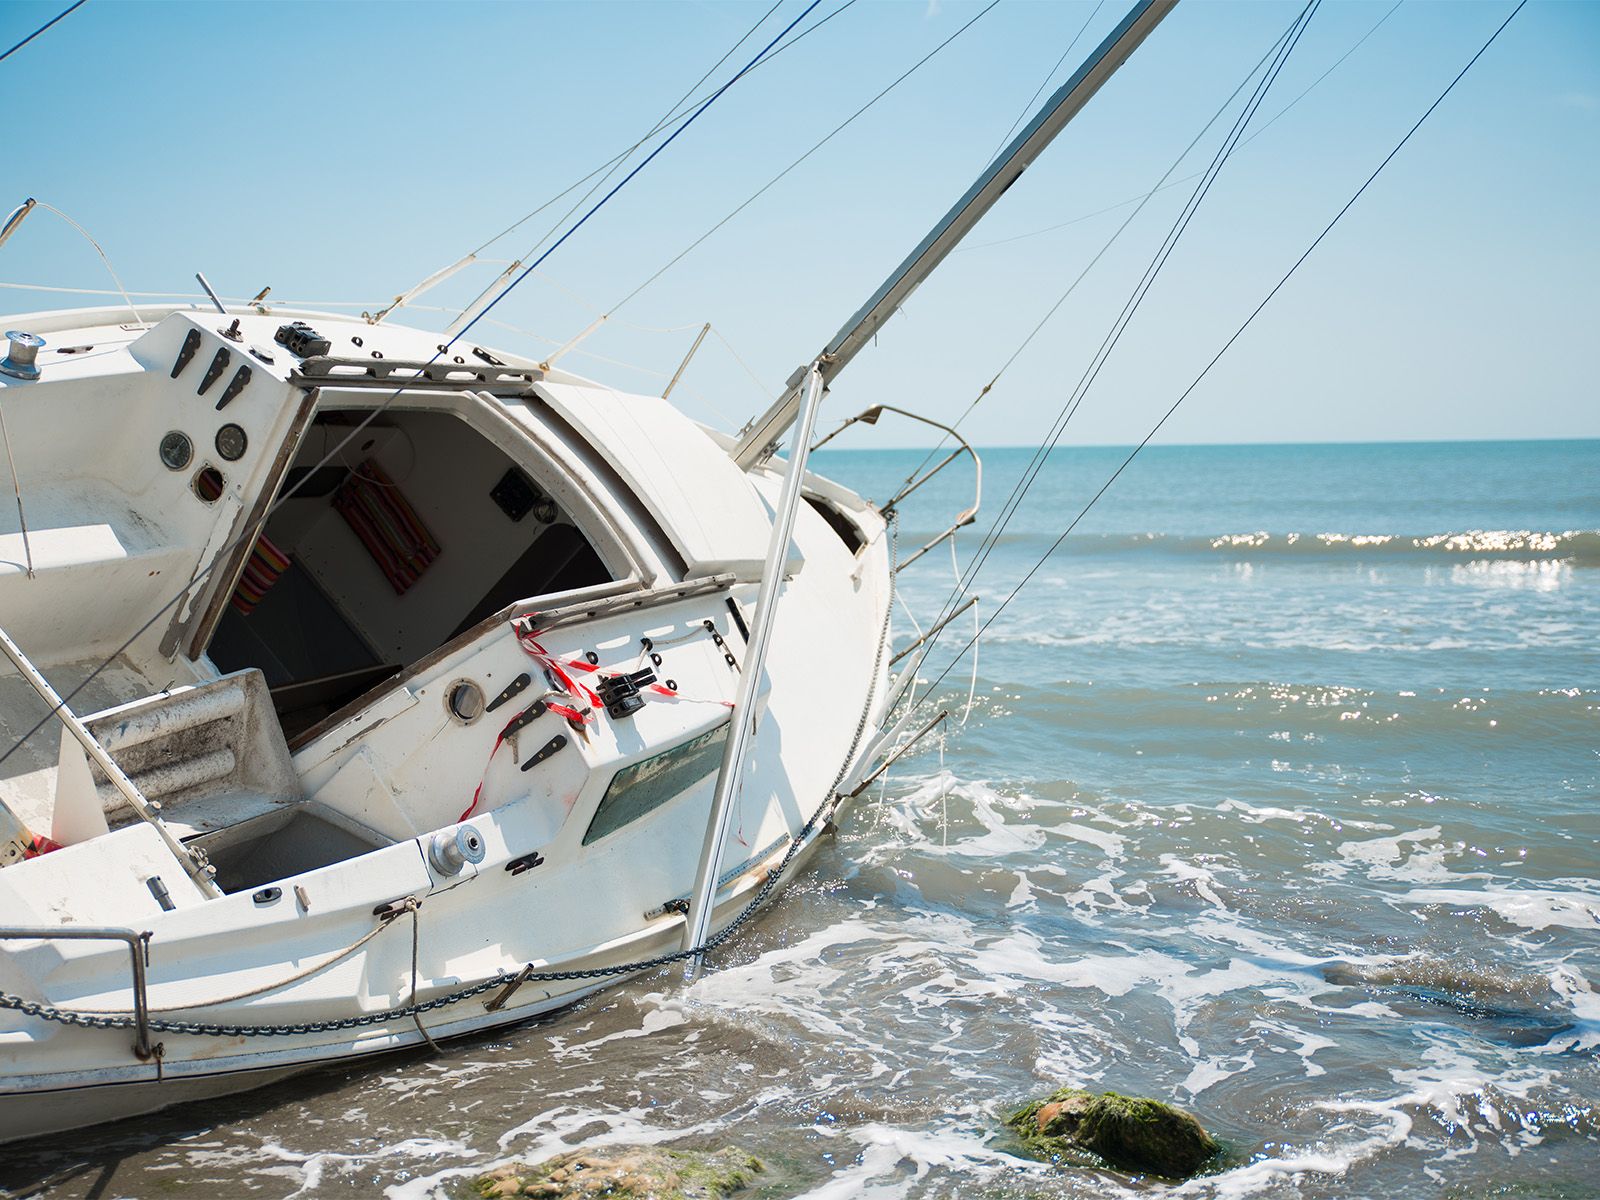 sailboat wrecked on shore